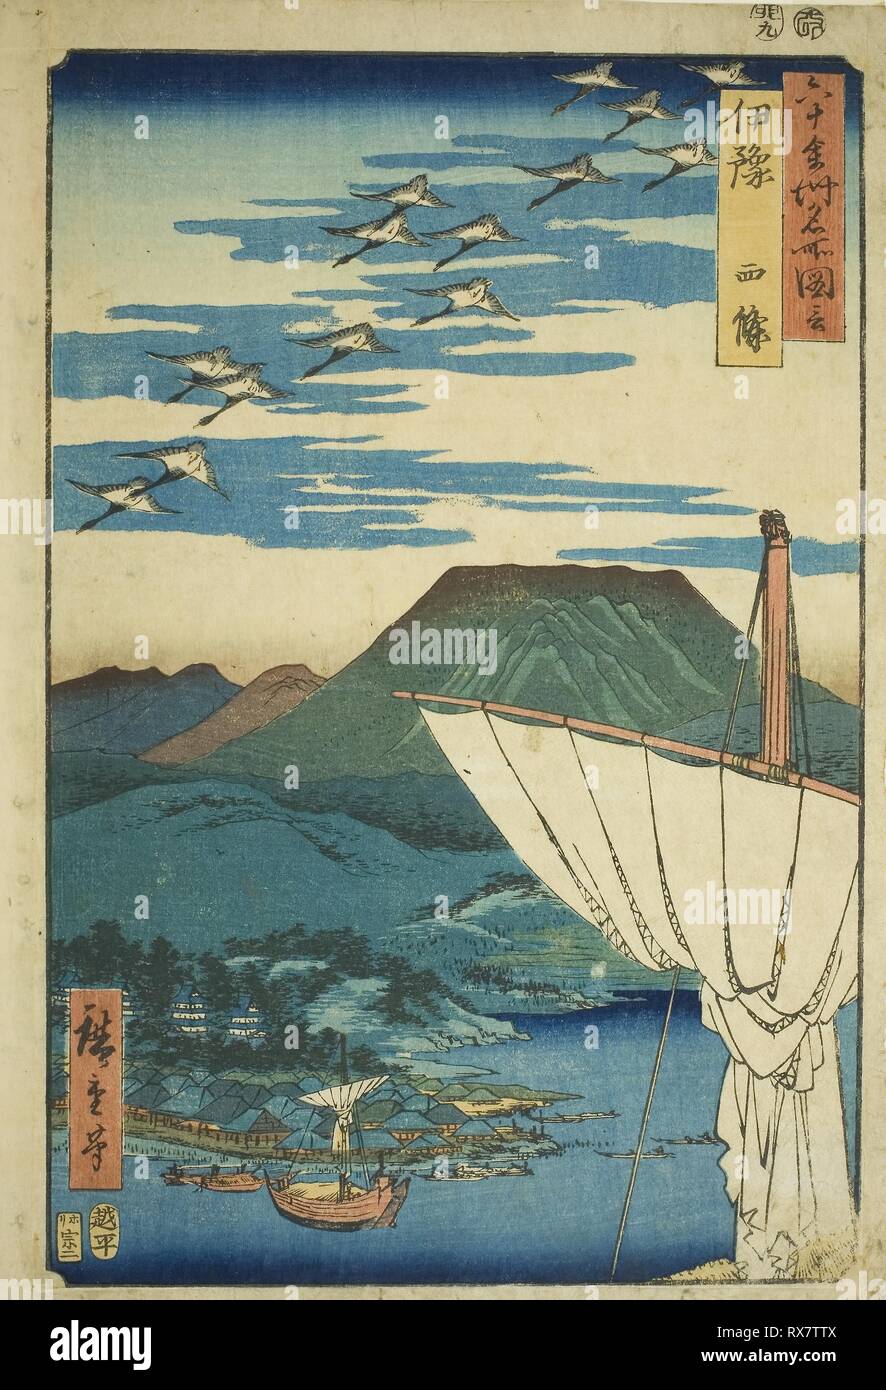 Iyo Province: Saijo (Iyo, Saijo), from the series 'Famous Places in the Sixty Provinces (Rokujuyoshu meisho zue)'. Utagawa Hiroshige ?? ??; Japanese, 1797-1858. Date: 1855. Dimensions: 36 x 25.6 cm (40 3/16 x 10 1/16 in.). Color woodblock print; oban. Origin: Japan. Museum: The Chicago Art Institute. Stock Photo